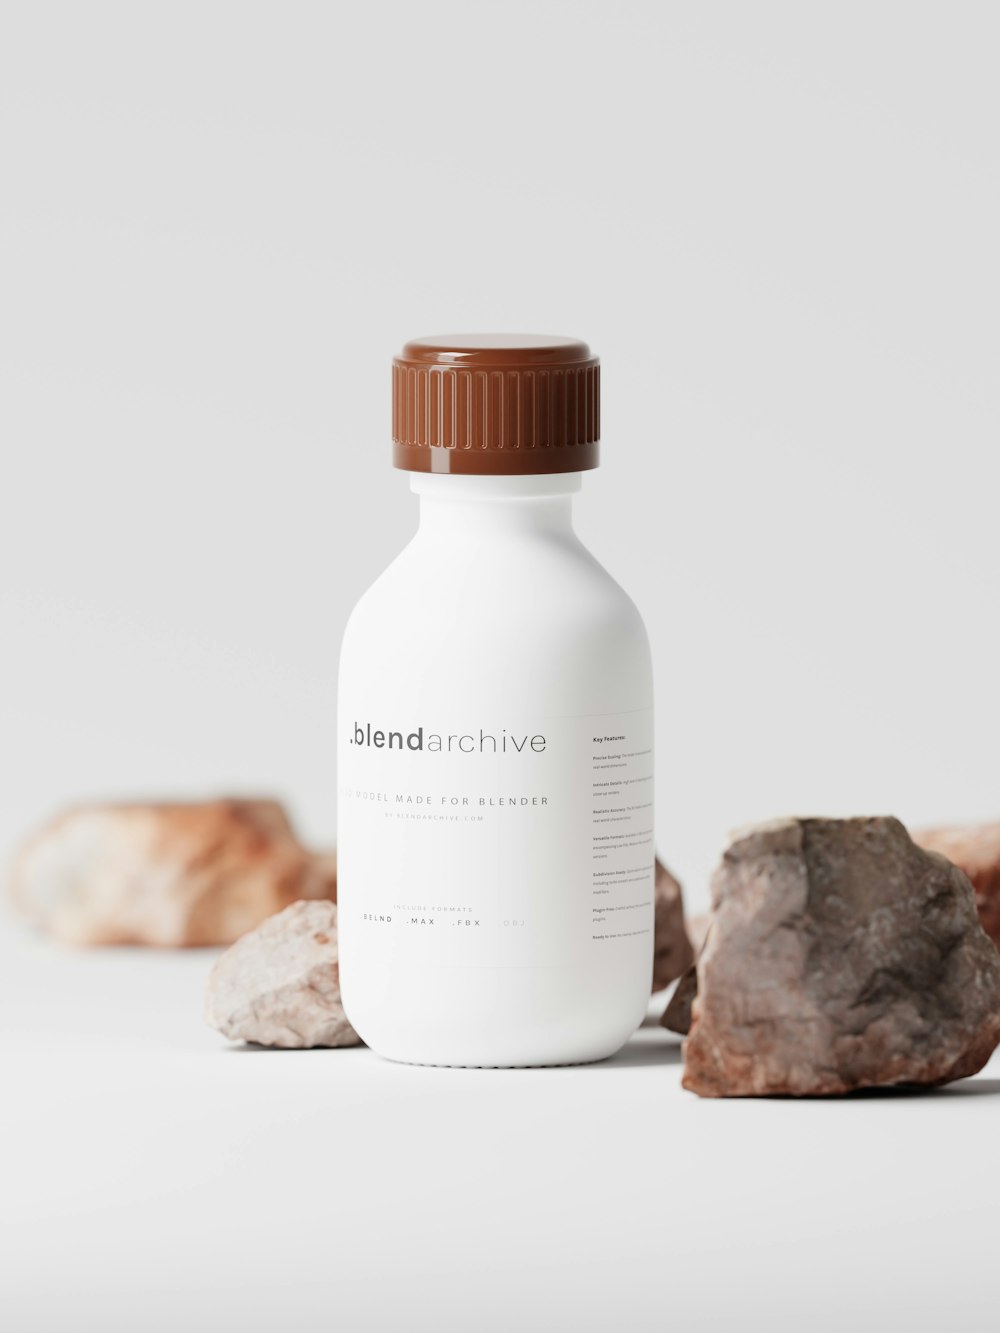 a bottle of medicine sitting next to some rocks